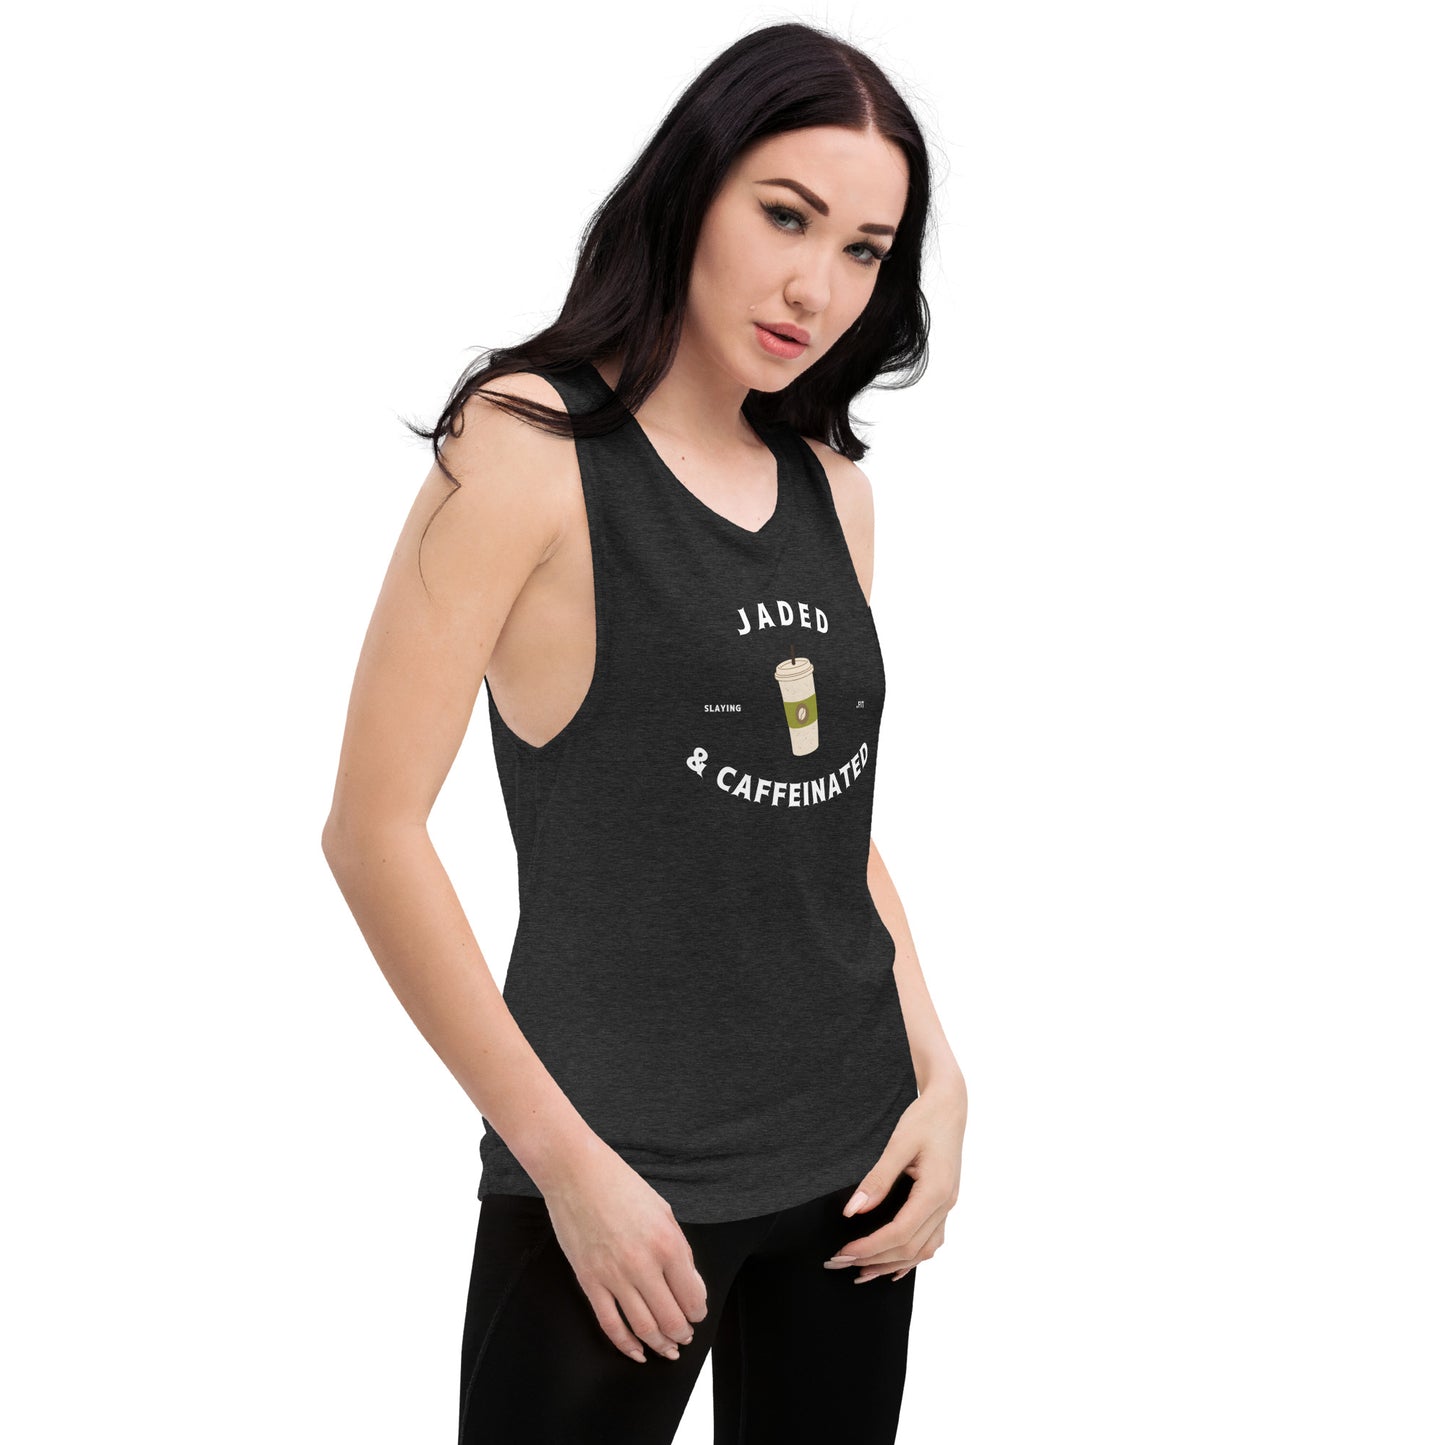 Jaded and Caffeinated Ladies’ Muscle Tank